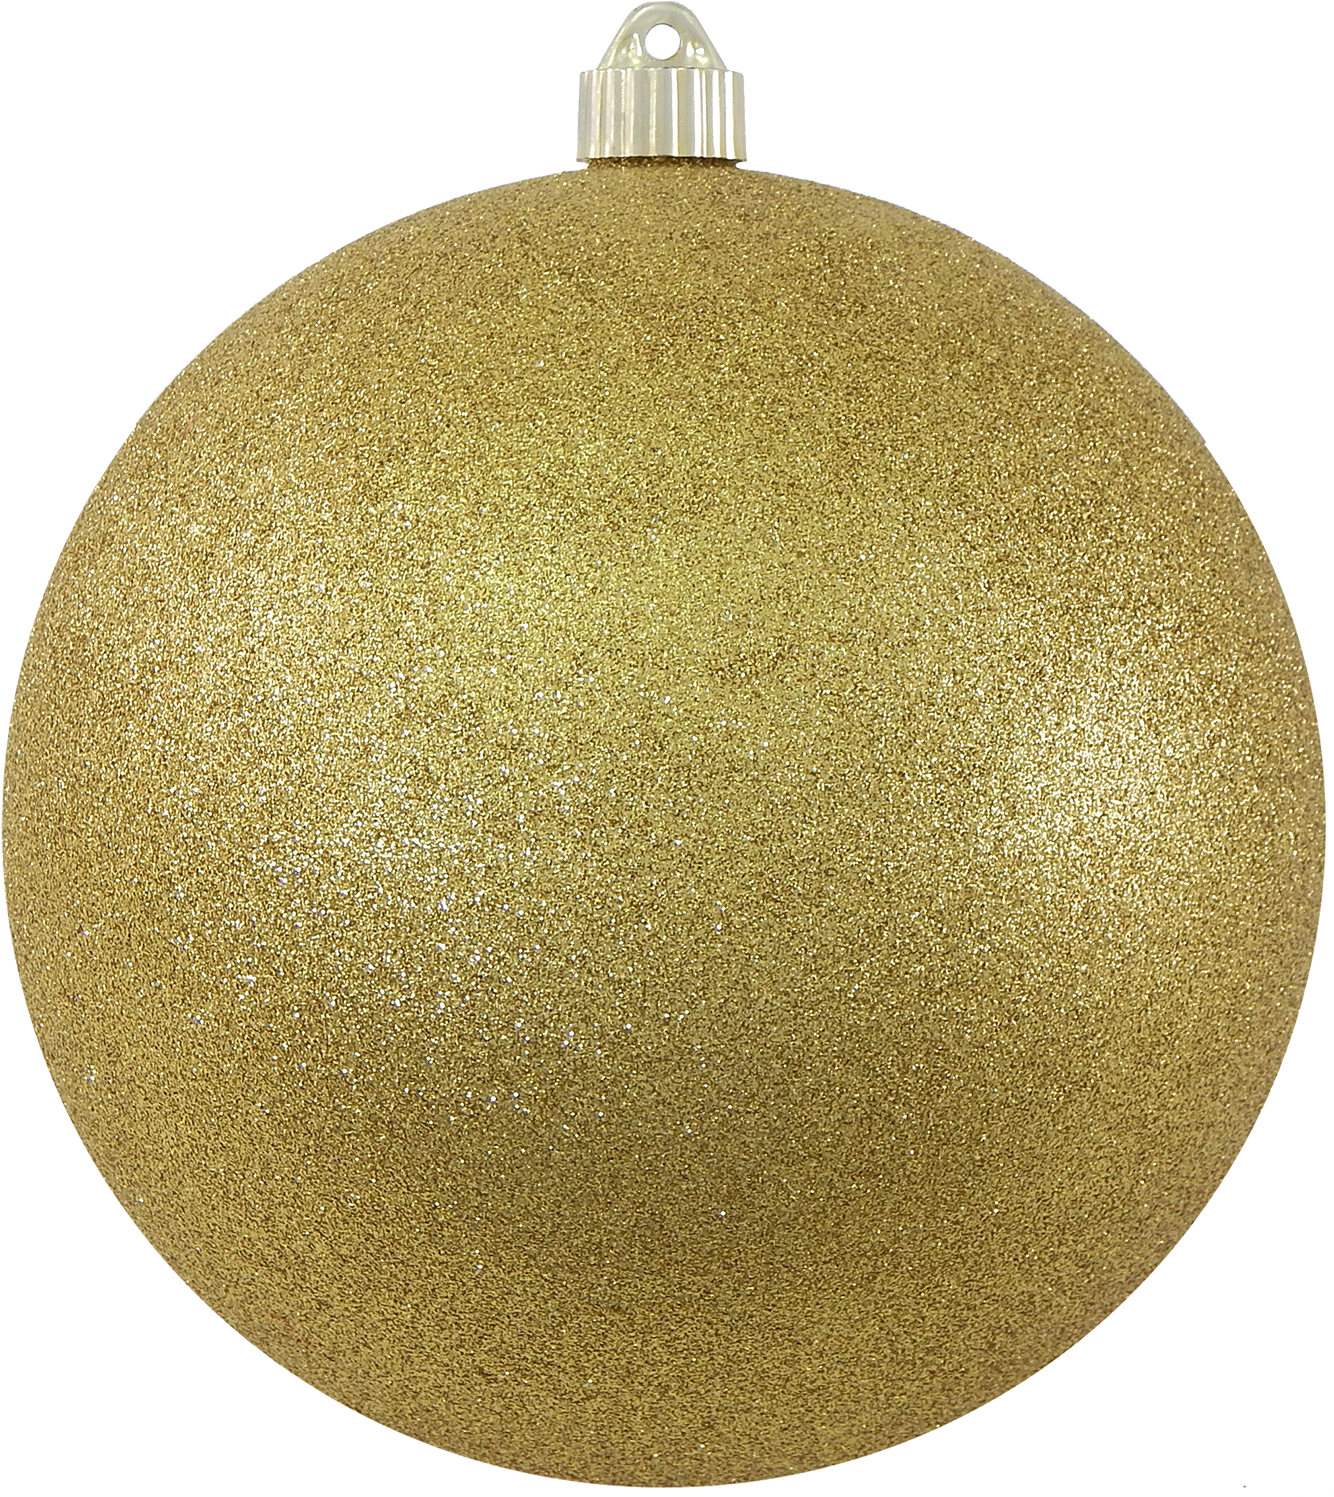 Gold Christmas Bauble Transparent Background